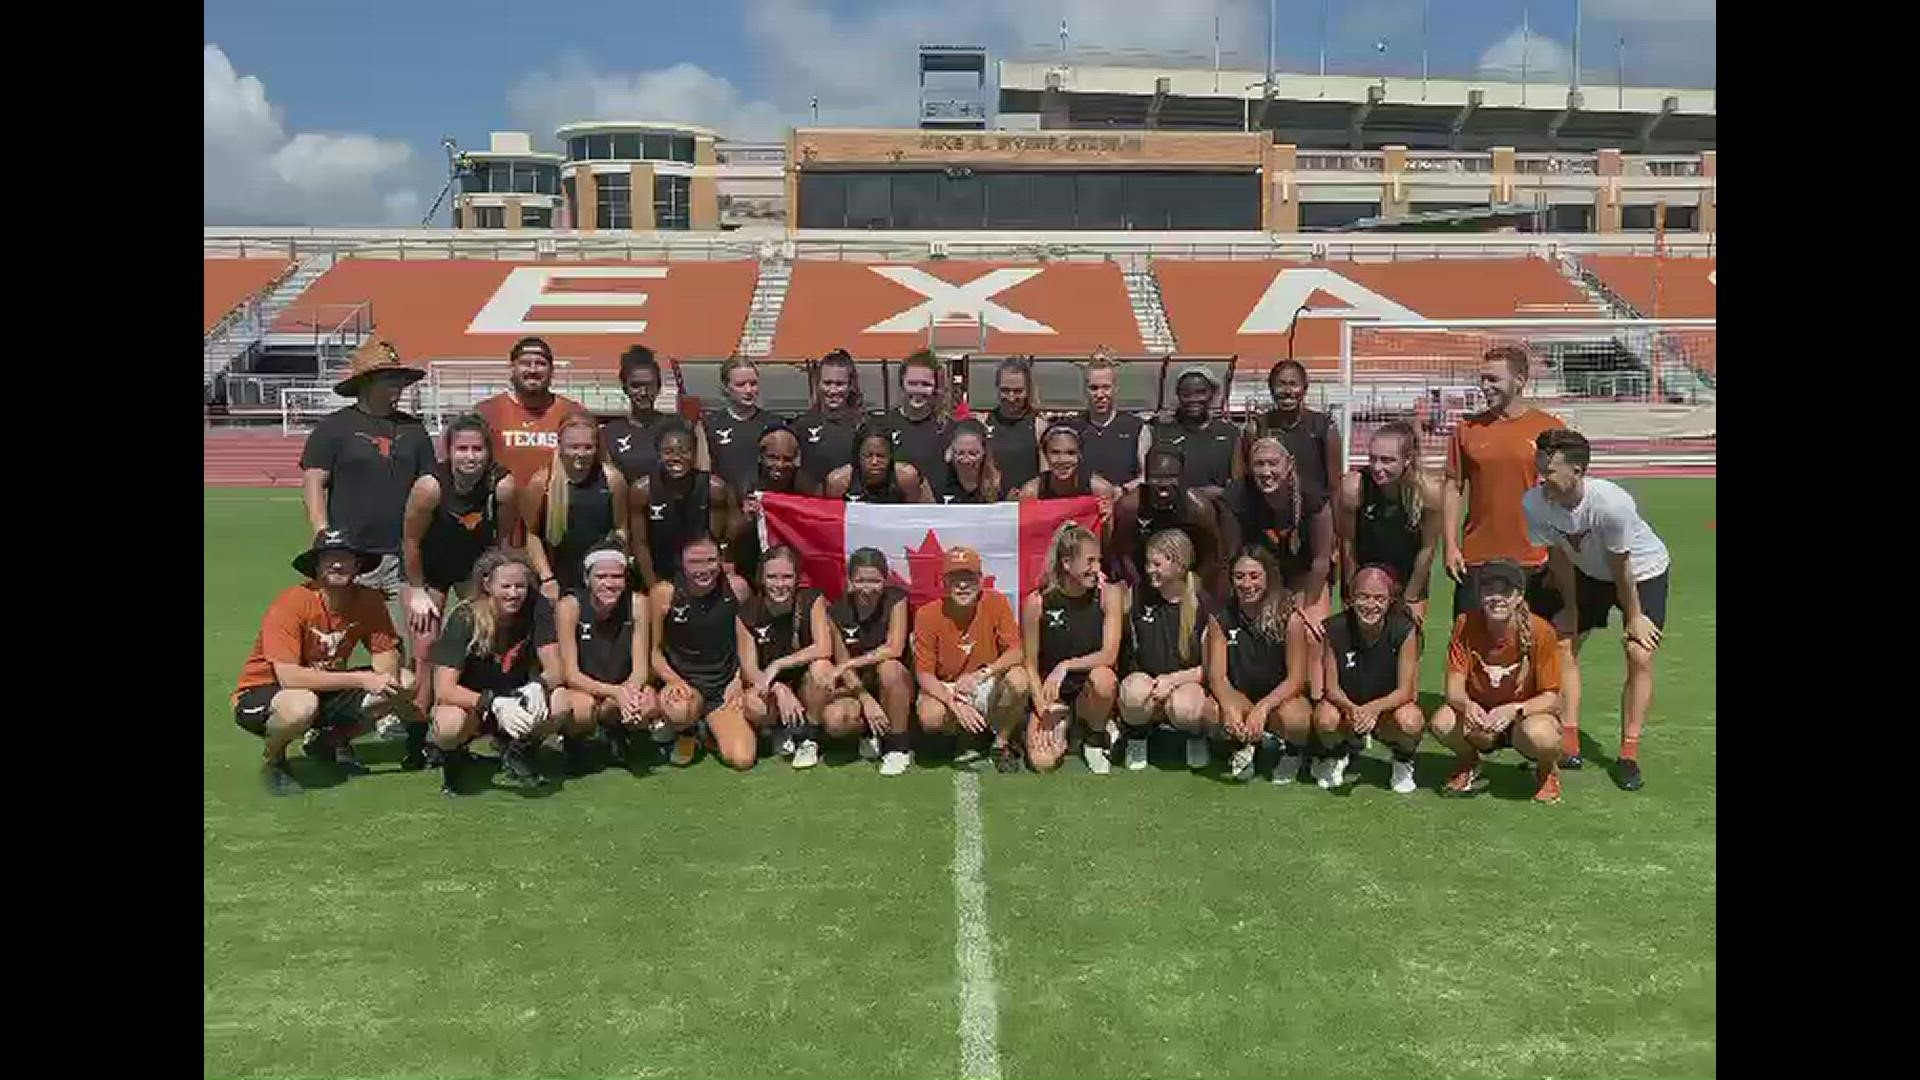 Julia Grosso scored the winning penalty kick at the 2020 Tokyo Olympics women's soccer finals for Team Canada.